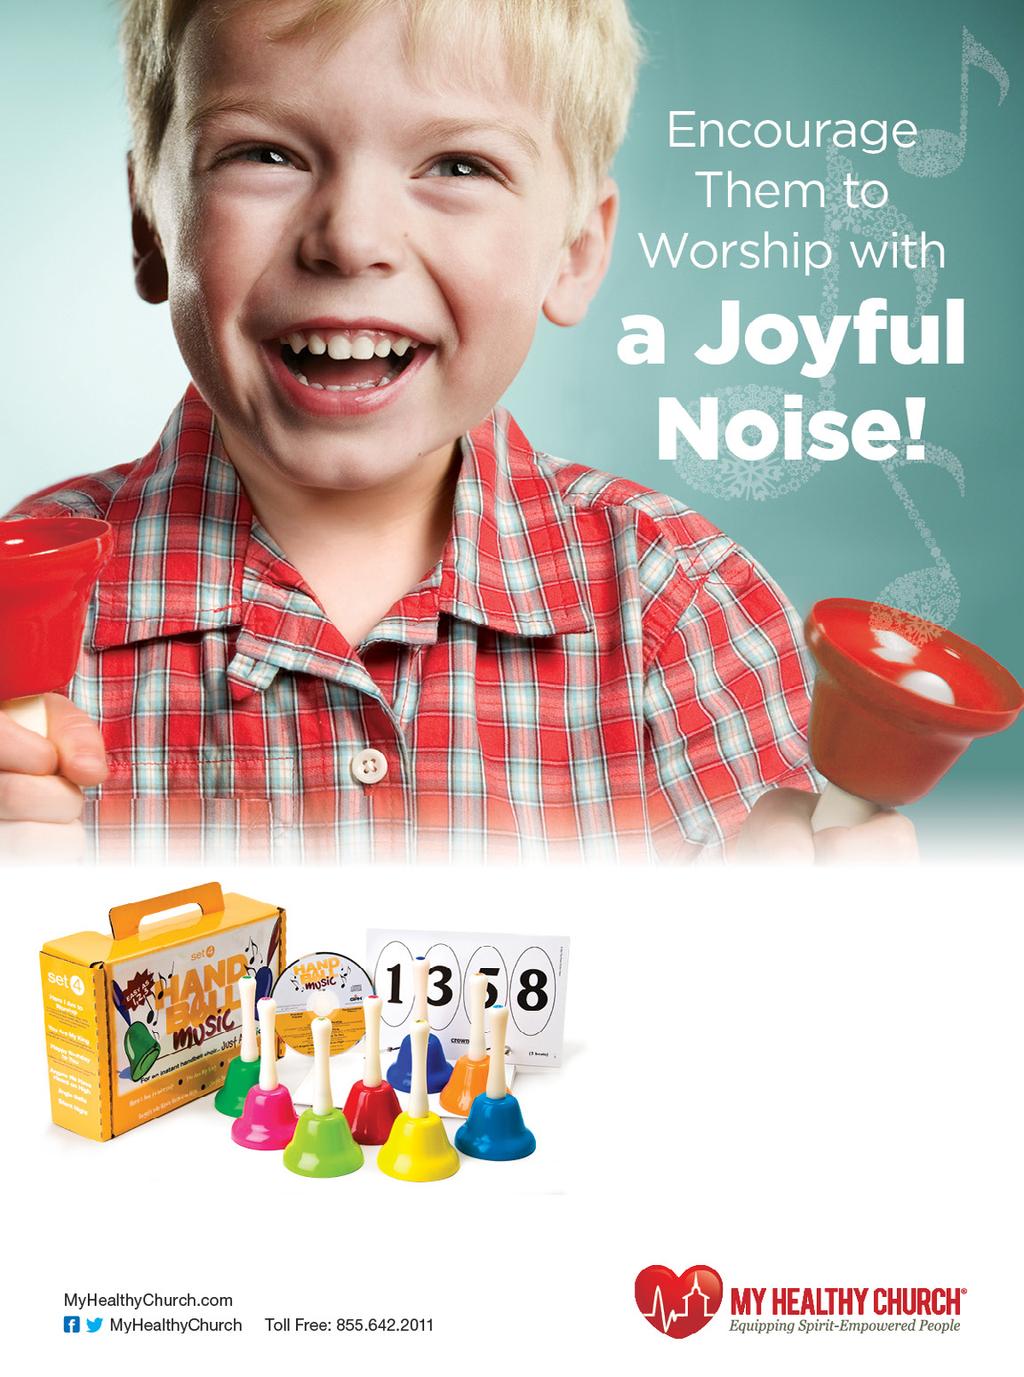 Introduce the kids in your church to musical worship with our easy-to-use handbell/music cards and accompaniment CD.